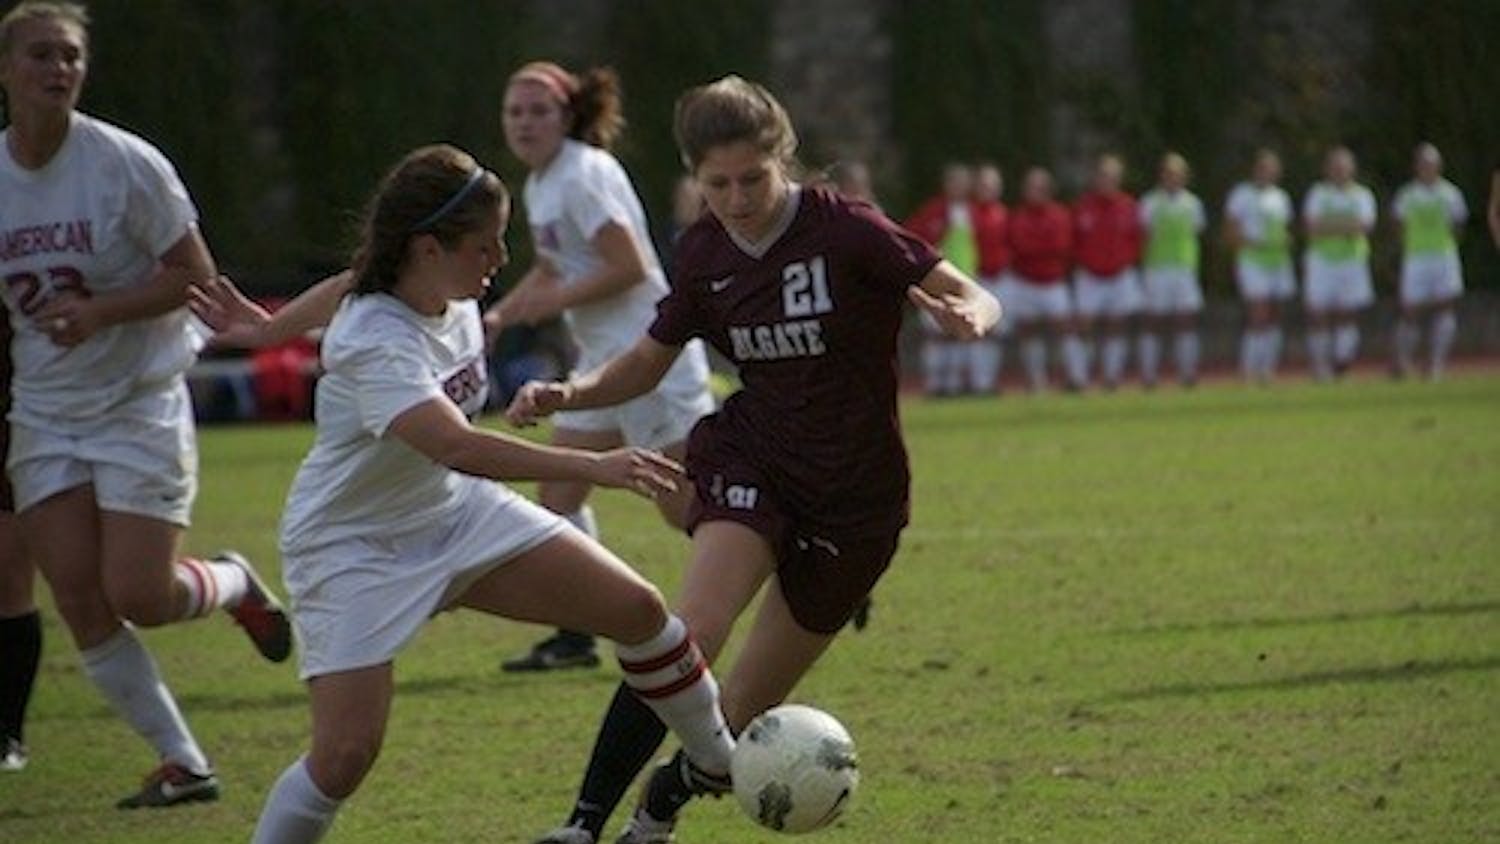 Sam Trotta assisted on Lindsay Muriâ€™s game-tying goal in AUâ€™s 2-2 draw against Colgate Oct. 27 at Reeves Field.